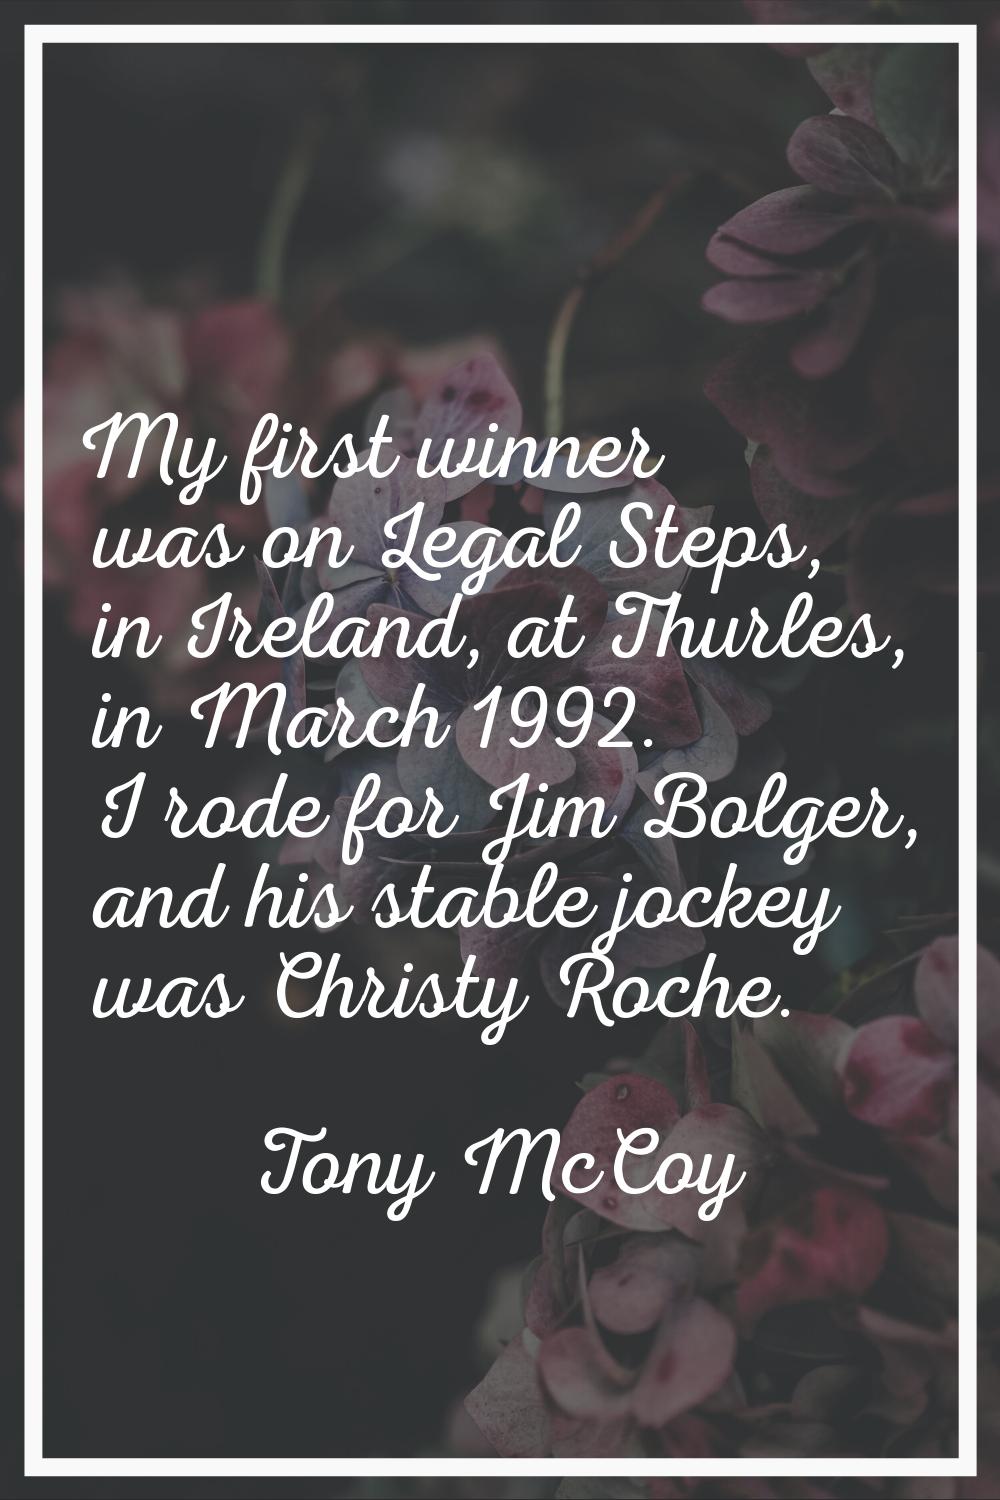 My first winner was on Legal Steps, in Ireland, at Thurles, in March 1992. I rode for Jim Bolger, a